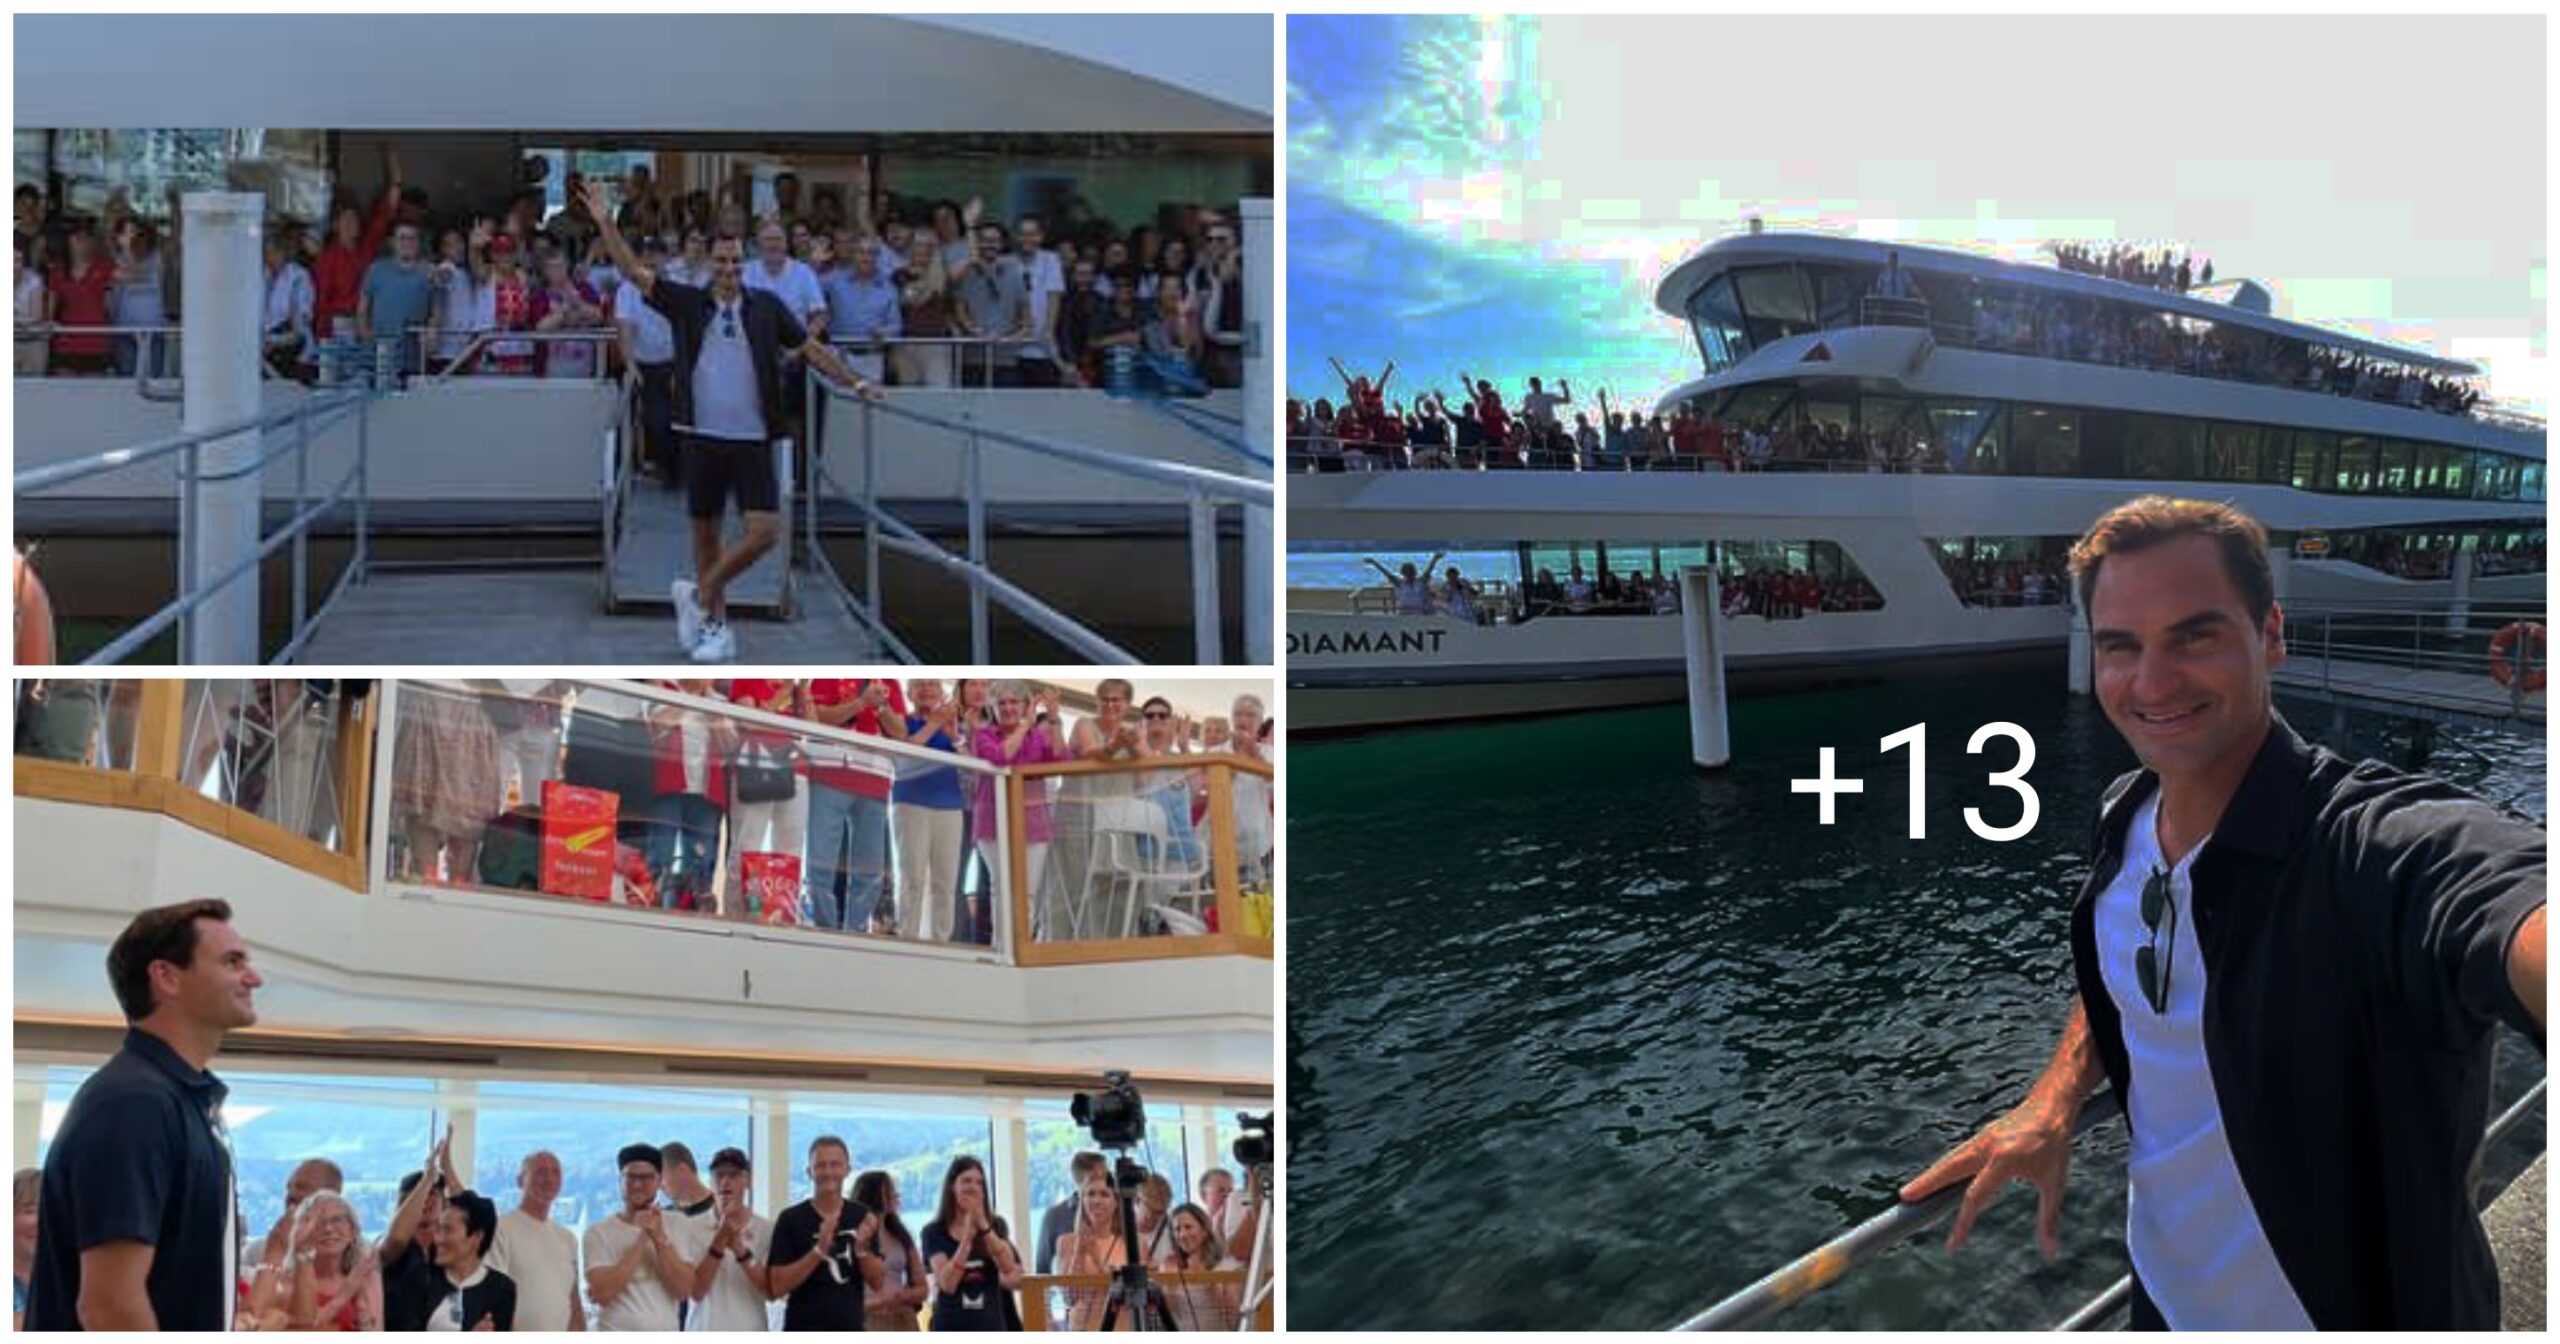 PHOTOS of Rodger Federer and the RF fanclub on lake Lucerne event.